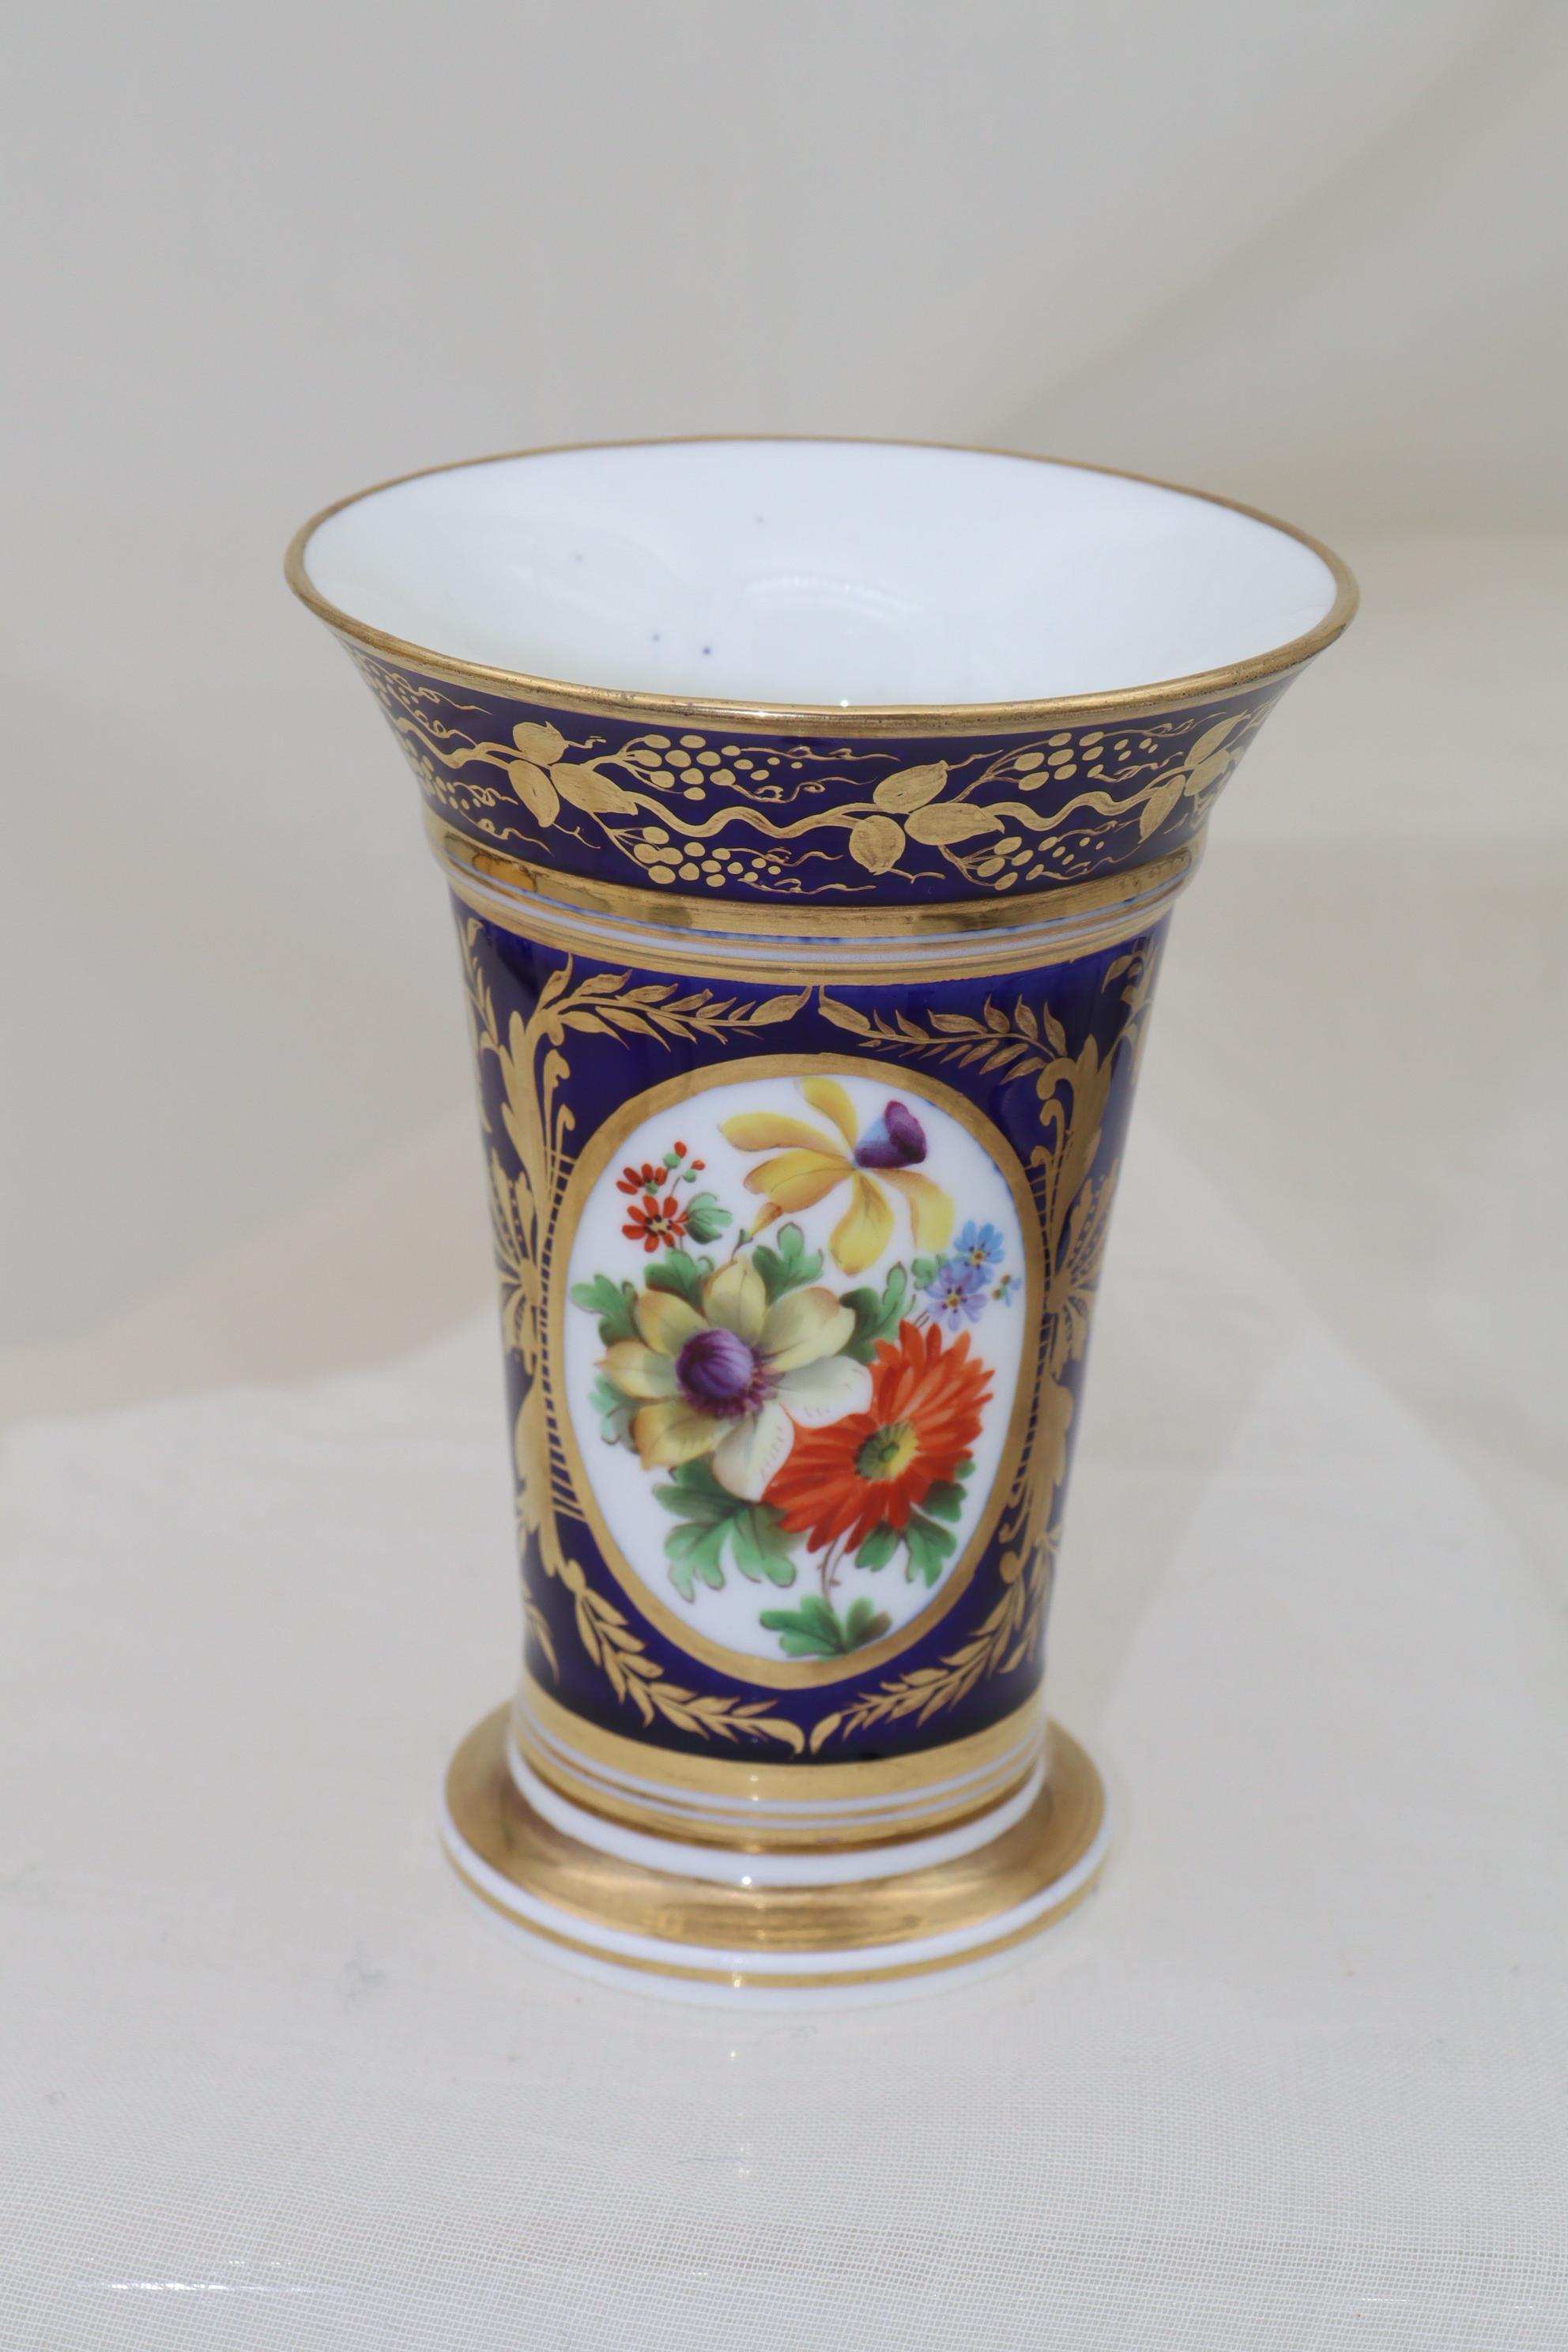 This Georgian hand painted and gilded porcelain spill vase features a gilded oval cartouche filled with a spray of colourful flowers. The cartouche is supported either side by an intricate gilded motif with more gilding to the rim and foot.